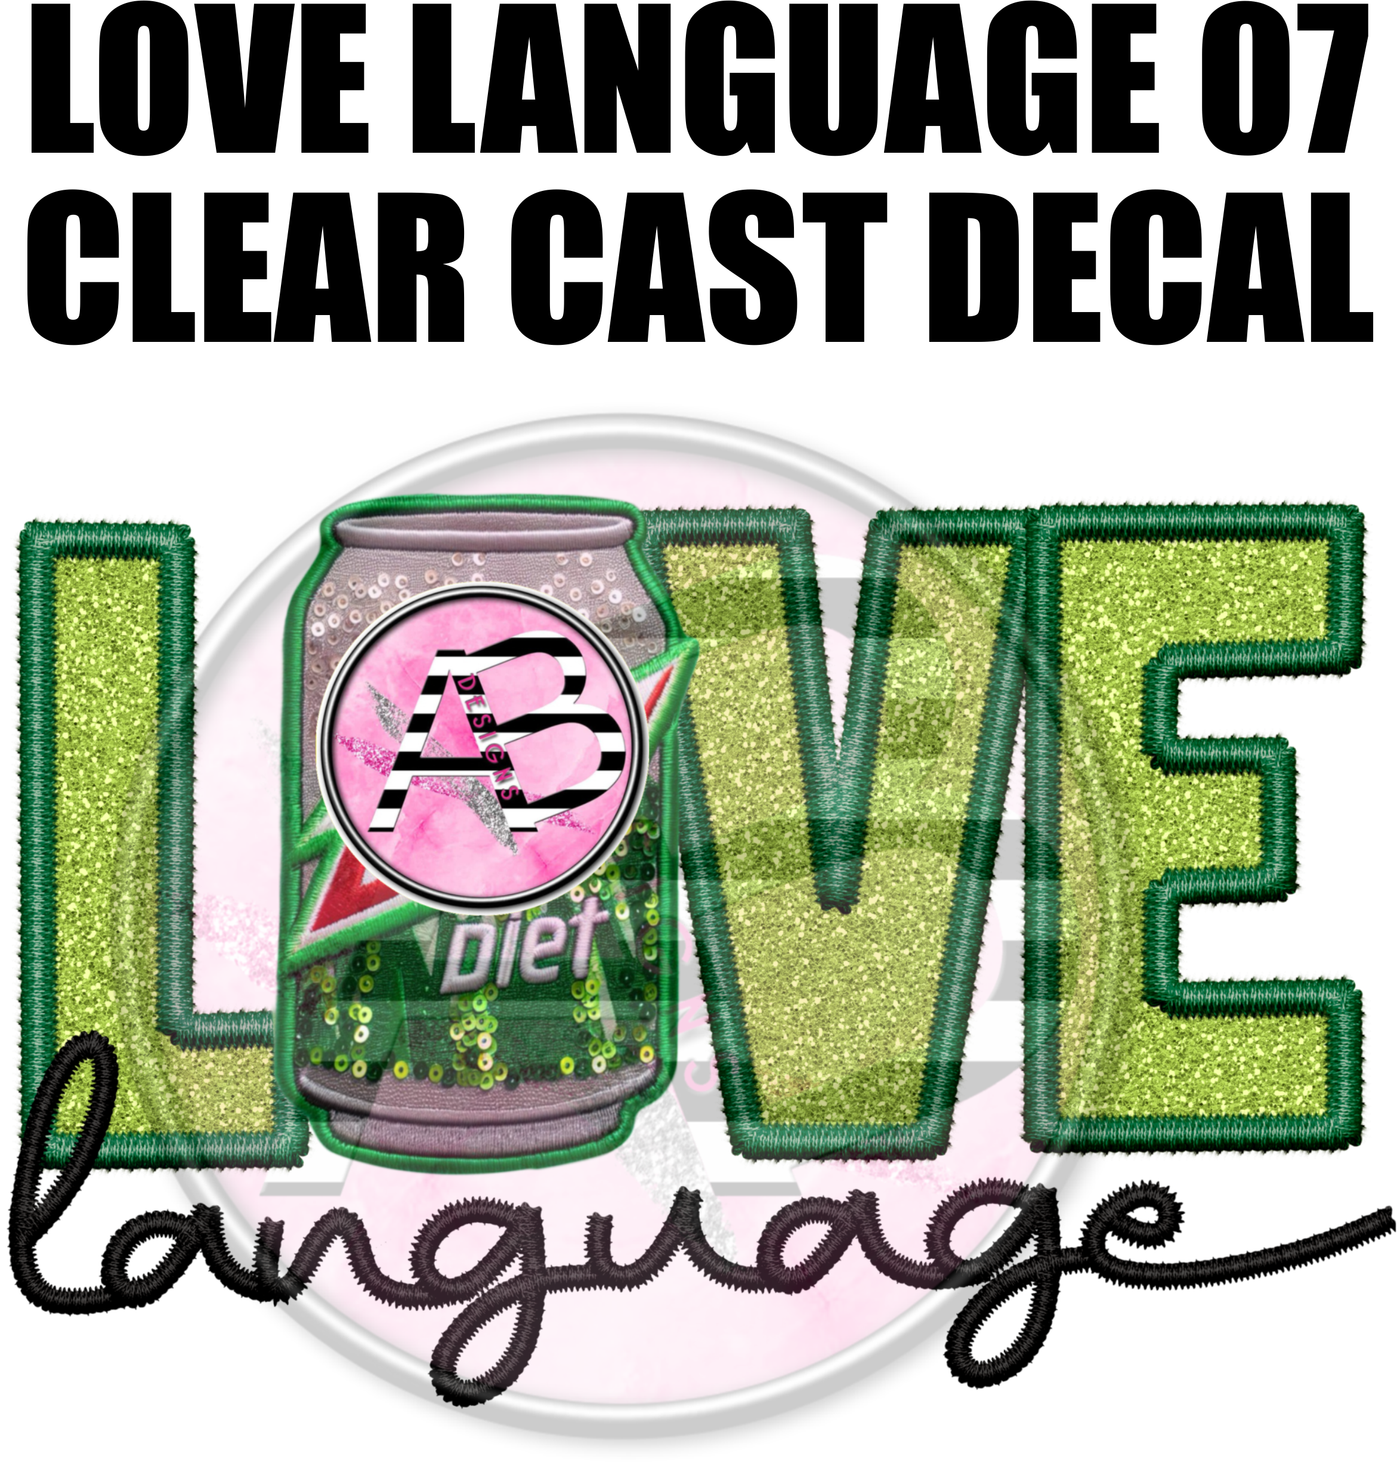 Love Language 07 - Clear Cast Decal-417